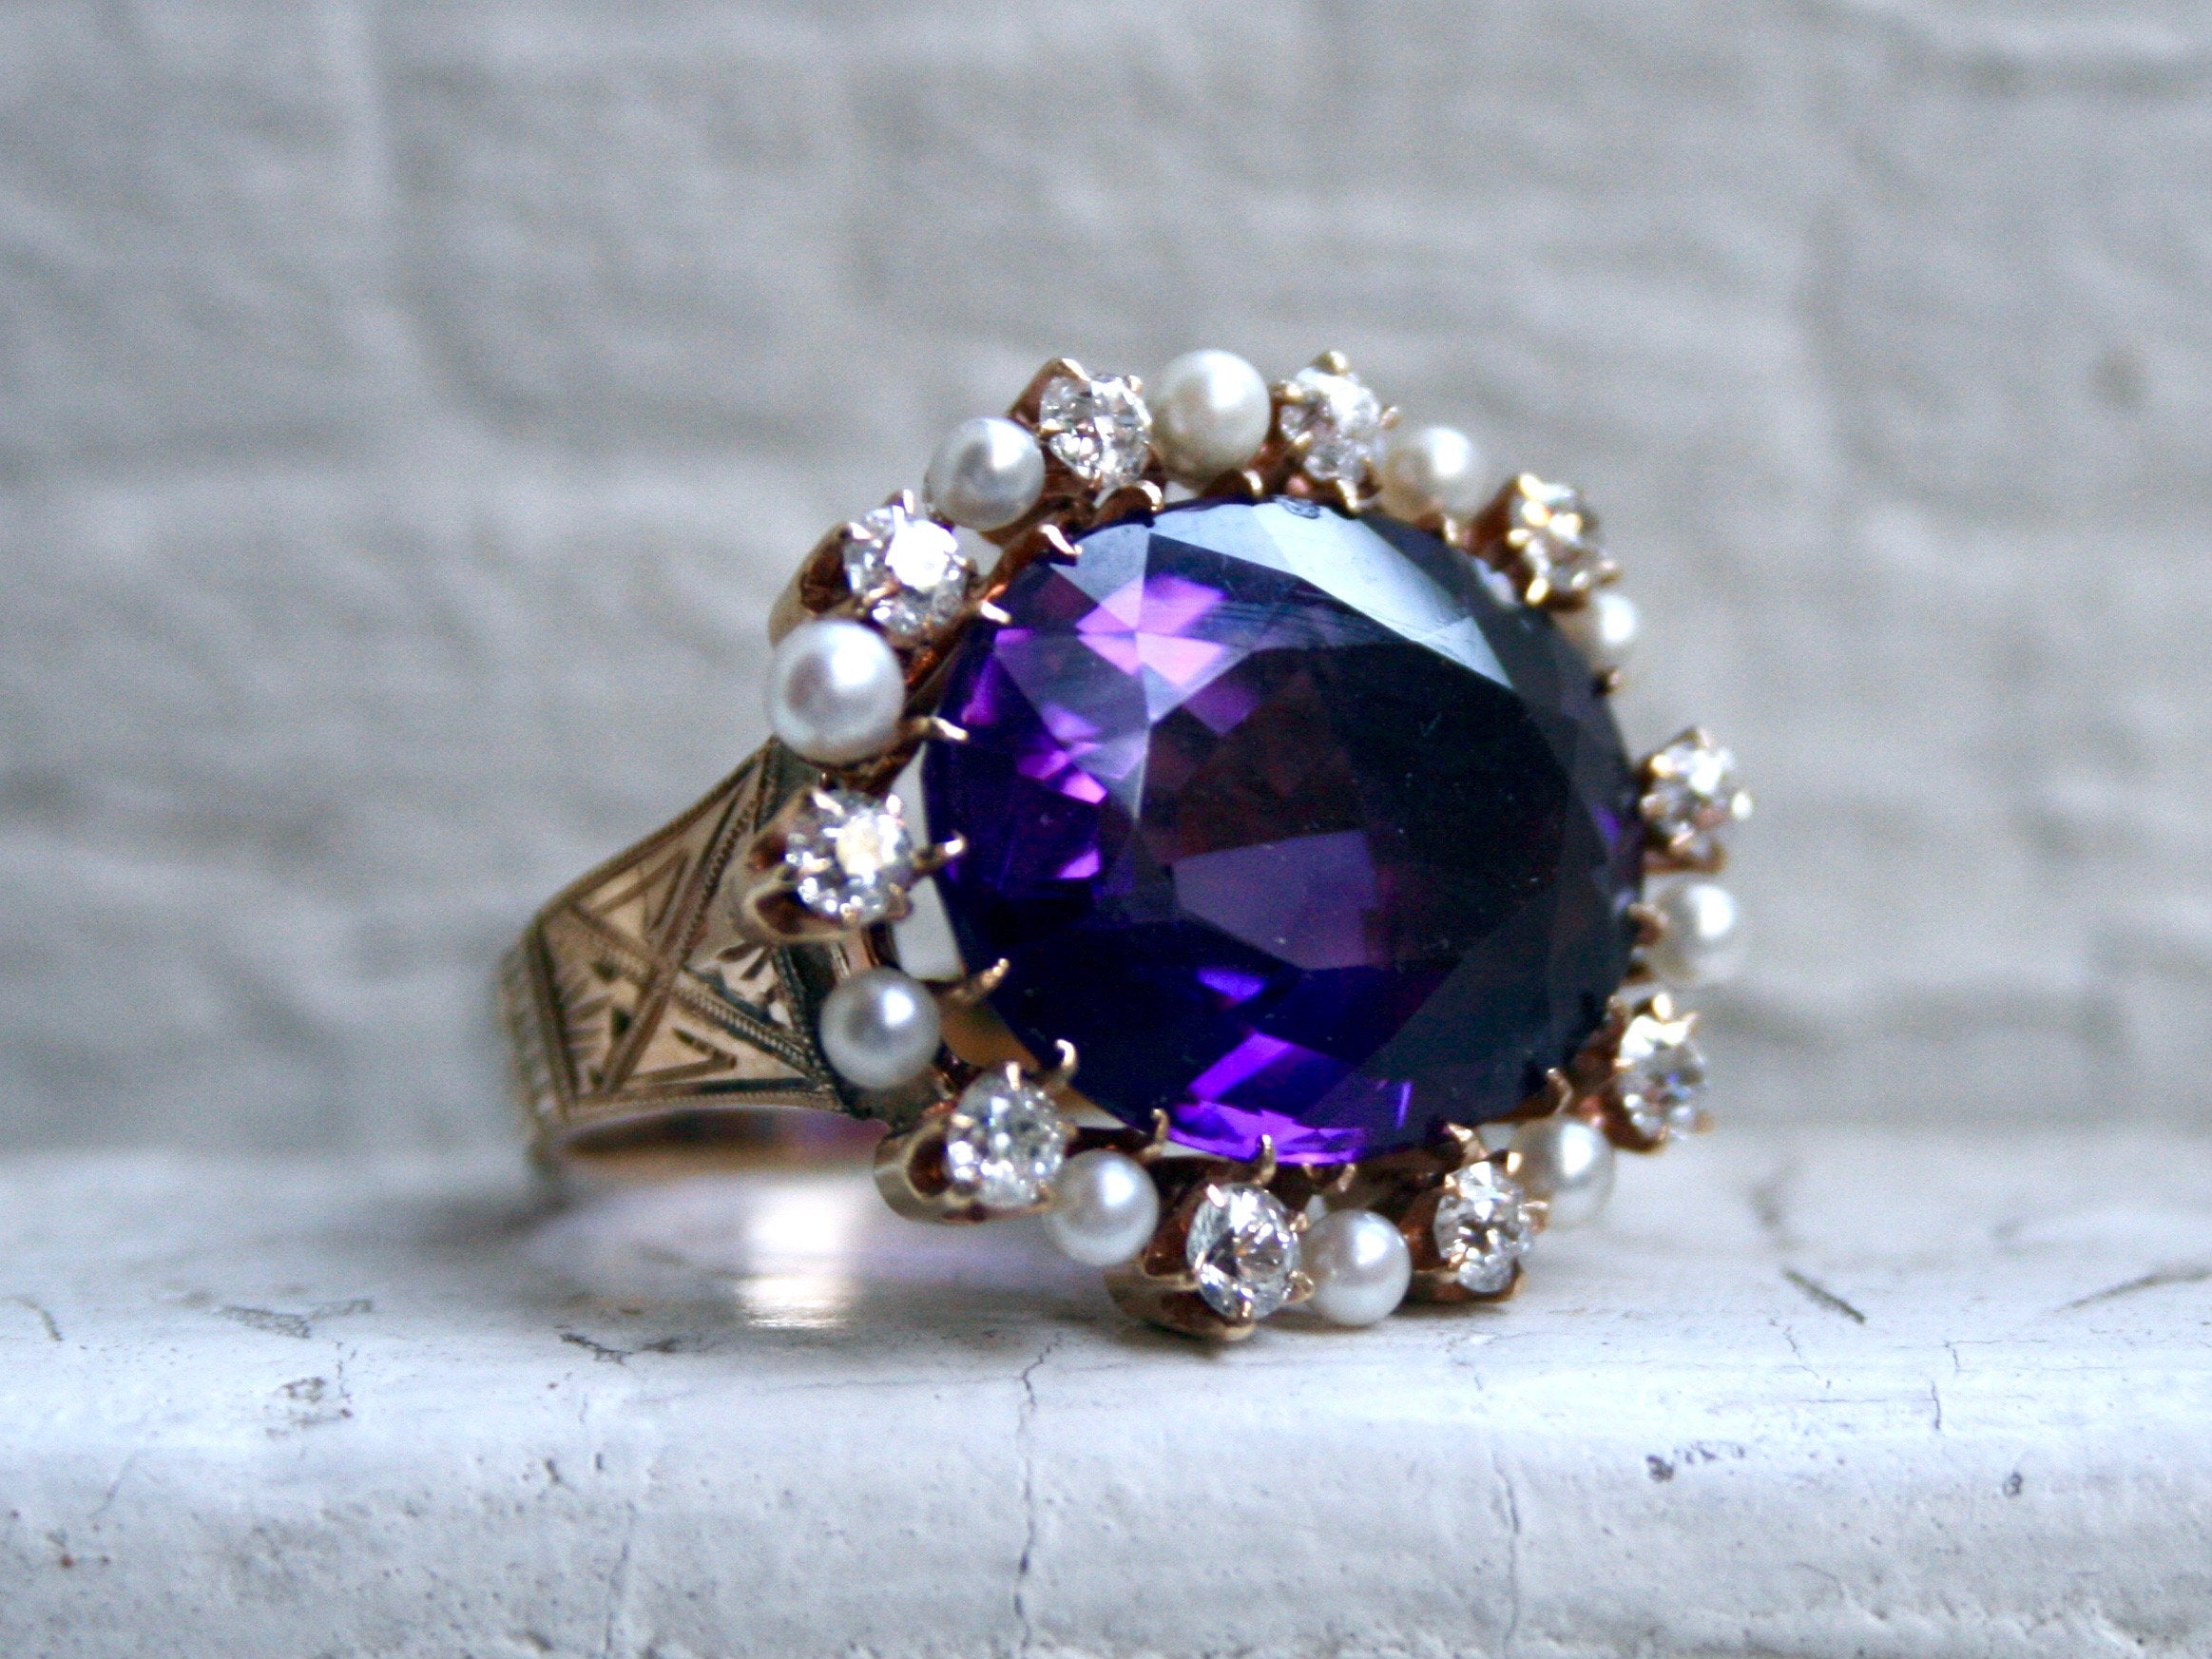 Outstanding Antique 14K Yellow Gold Amethyst Ring with Diamond and Pearl Halo - 15.70ct.